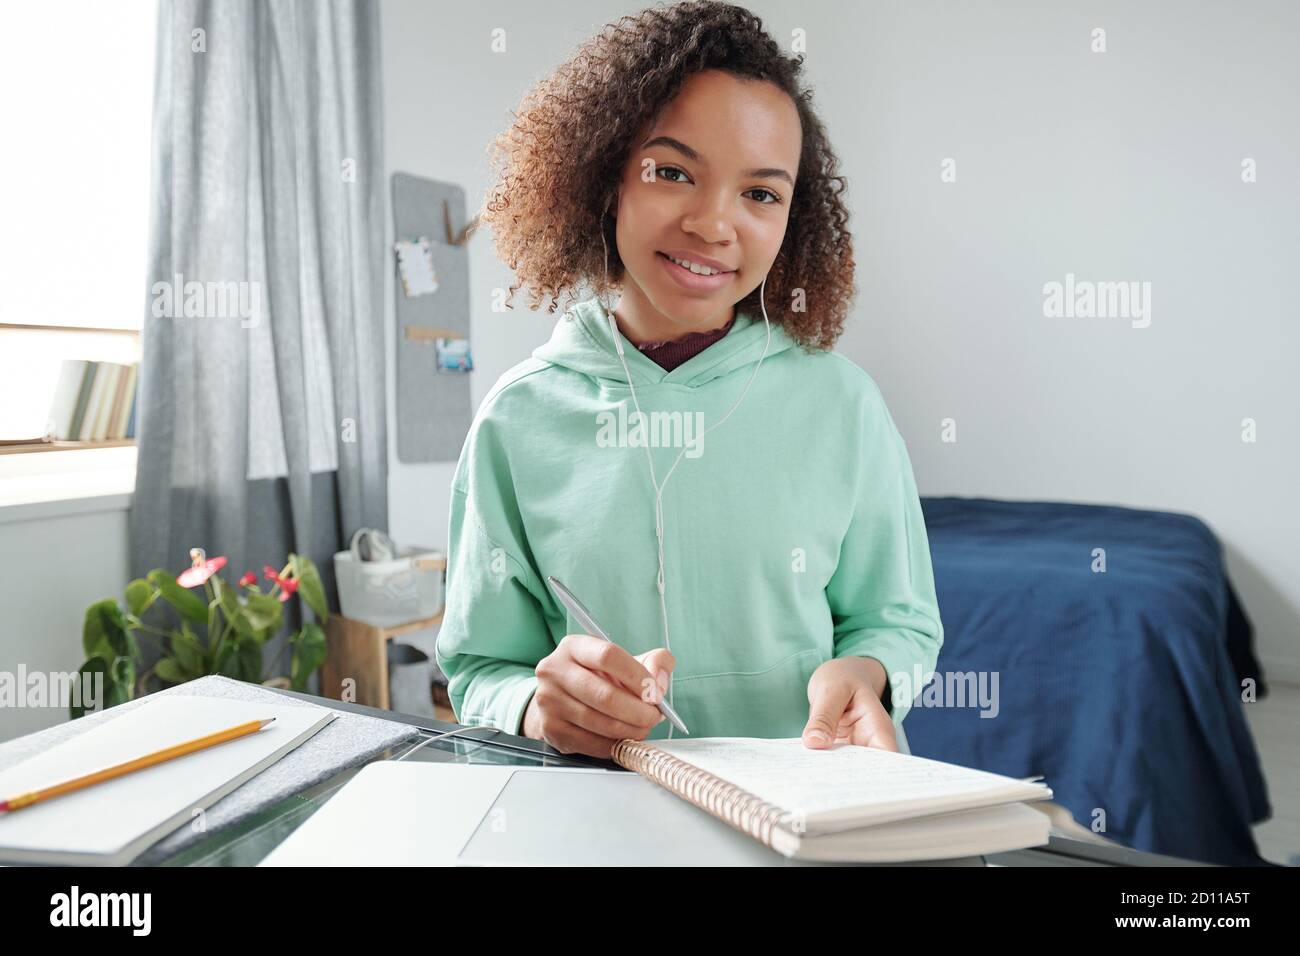 Cheerful mixed-race teenage student making notes in copybook in bedroom Stock Photo